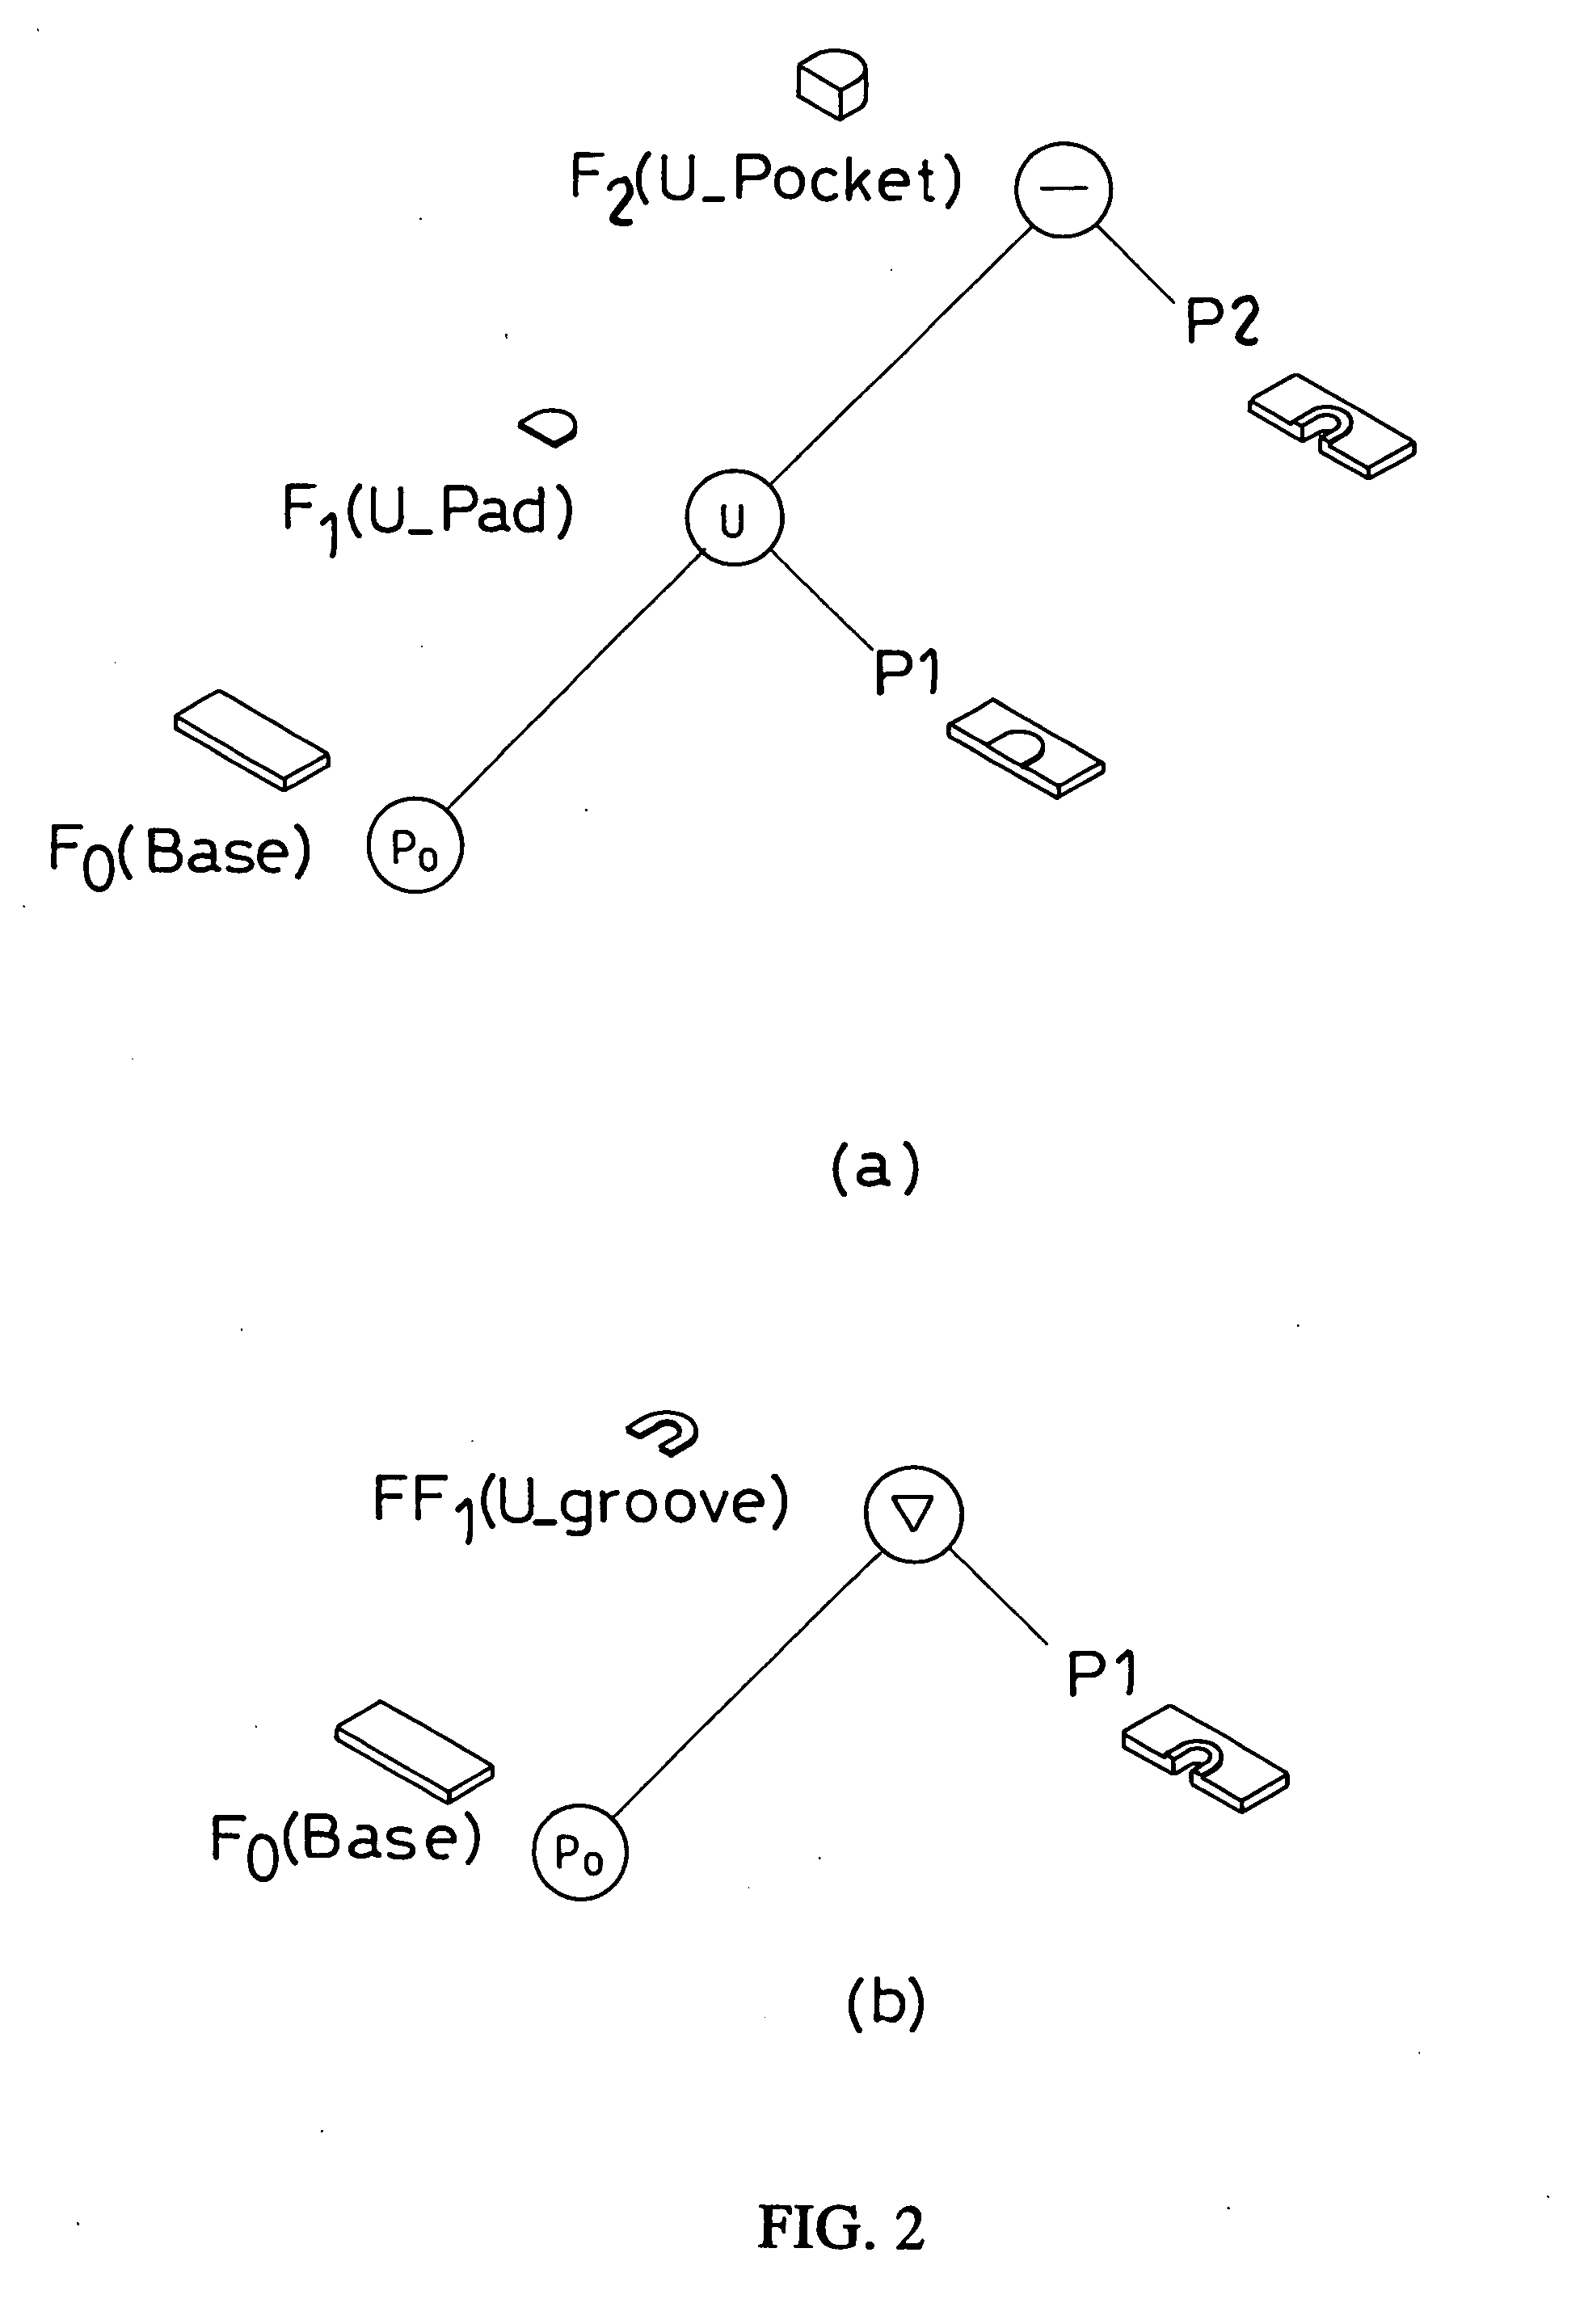 Method for constructing object by stacking up functional feature